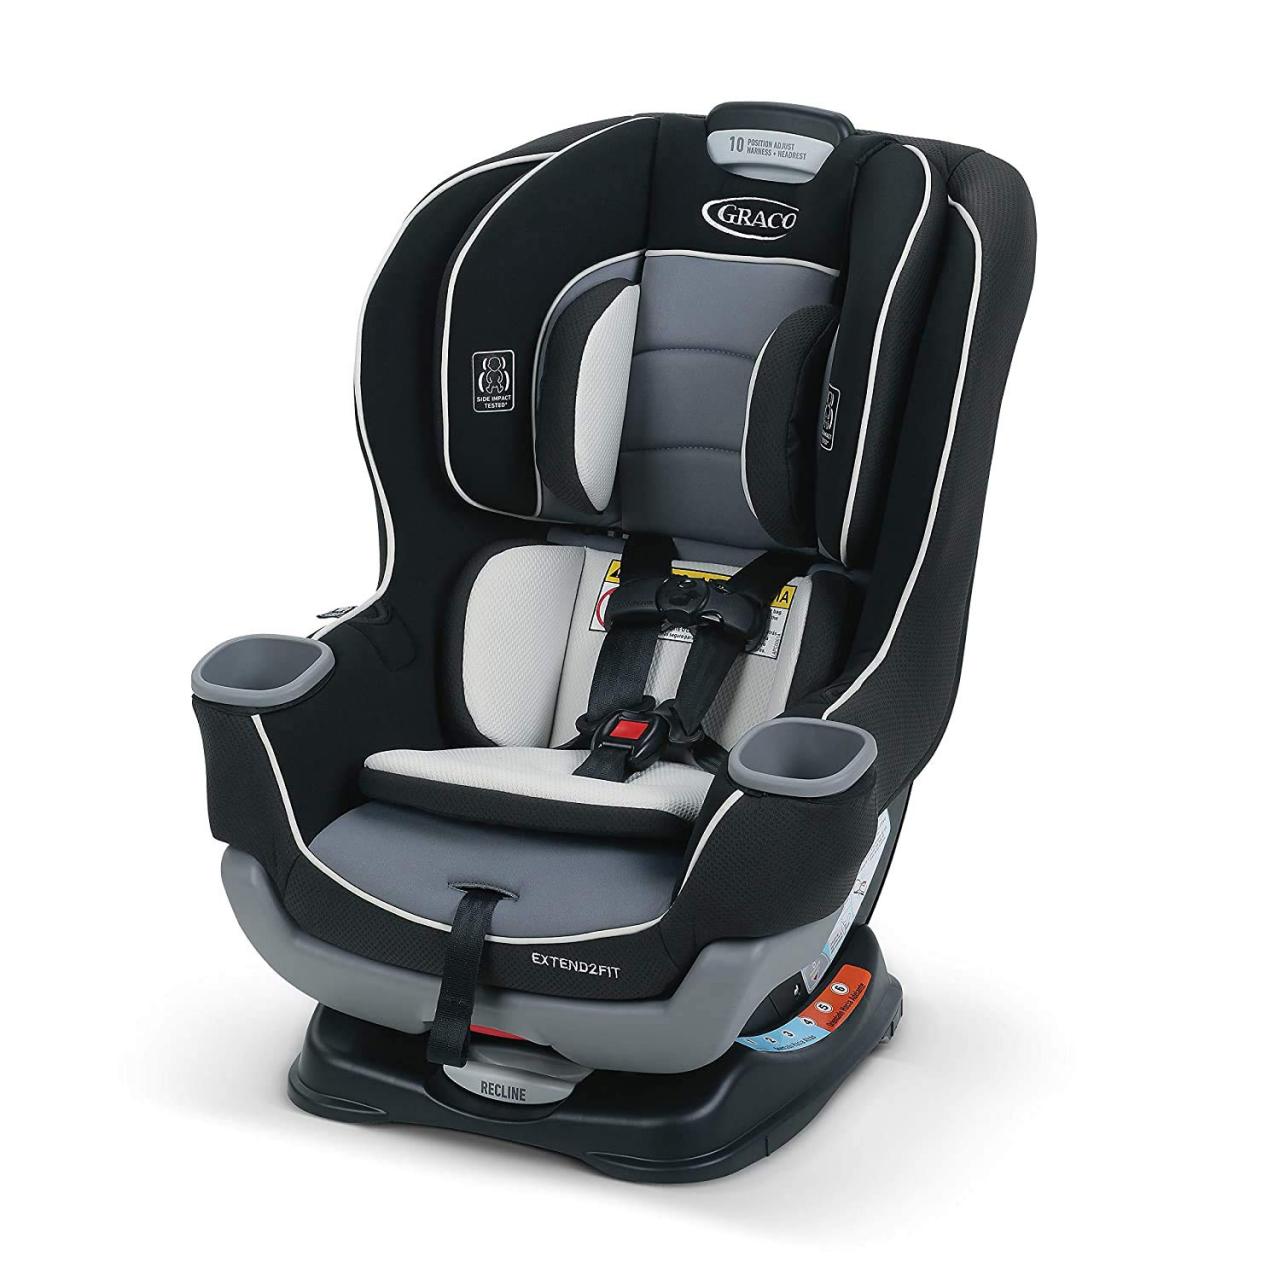 Buy Graco Extend2Fit Convertible Car Seat, Ride Rear Facing Longer with  Extend2Fit, Spire Online in Italy. B019EGMGNE